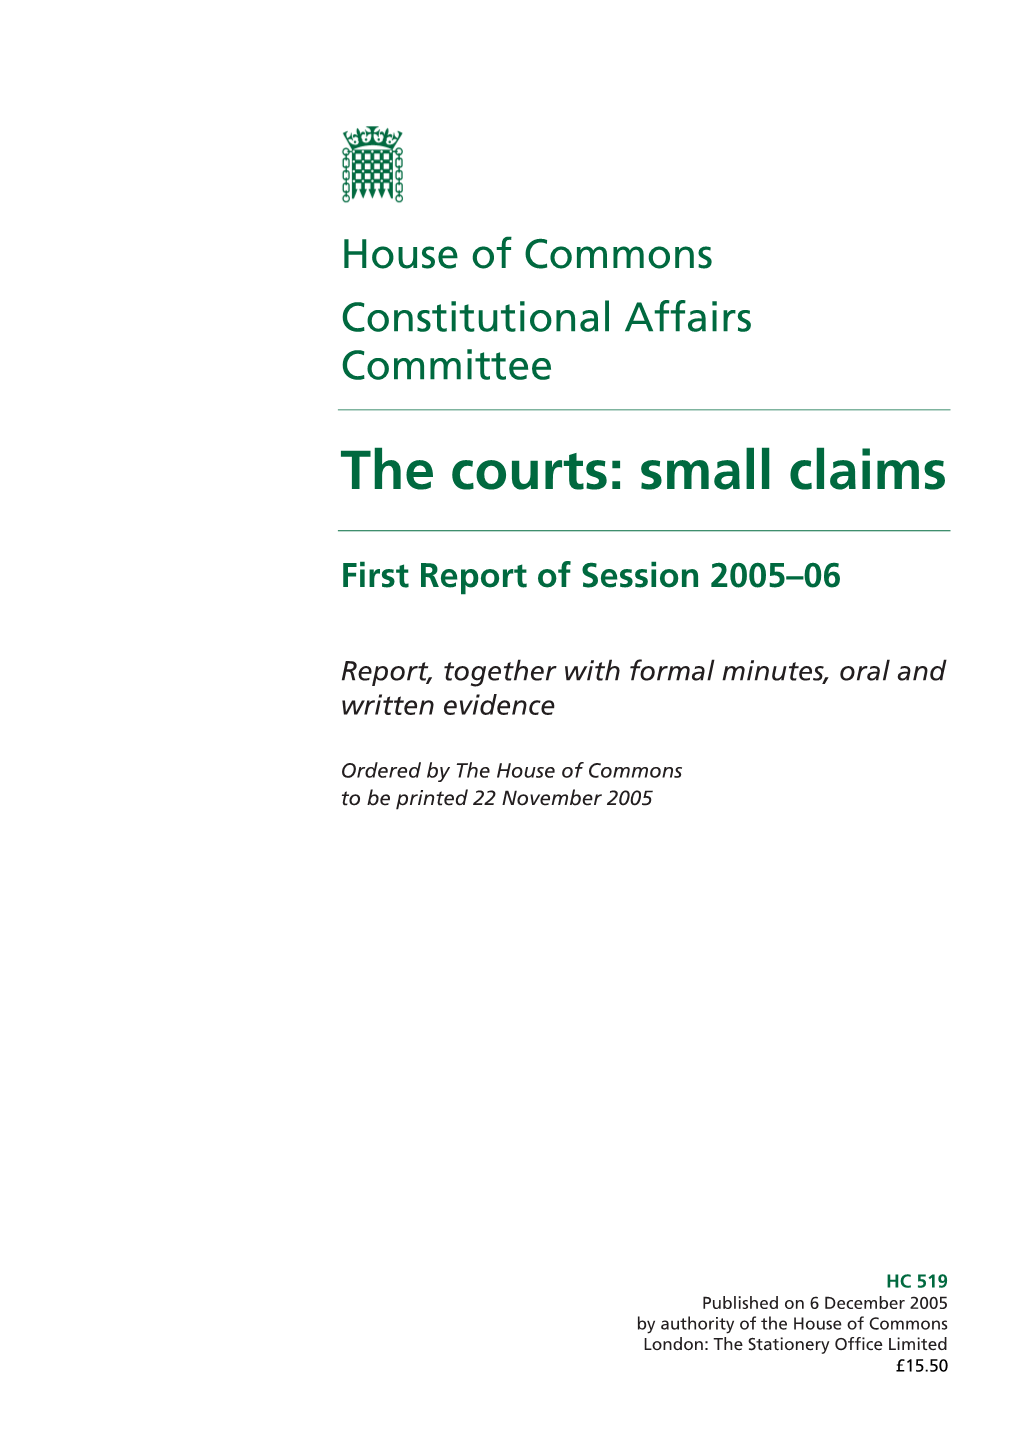 The Courts: Small Claims